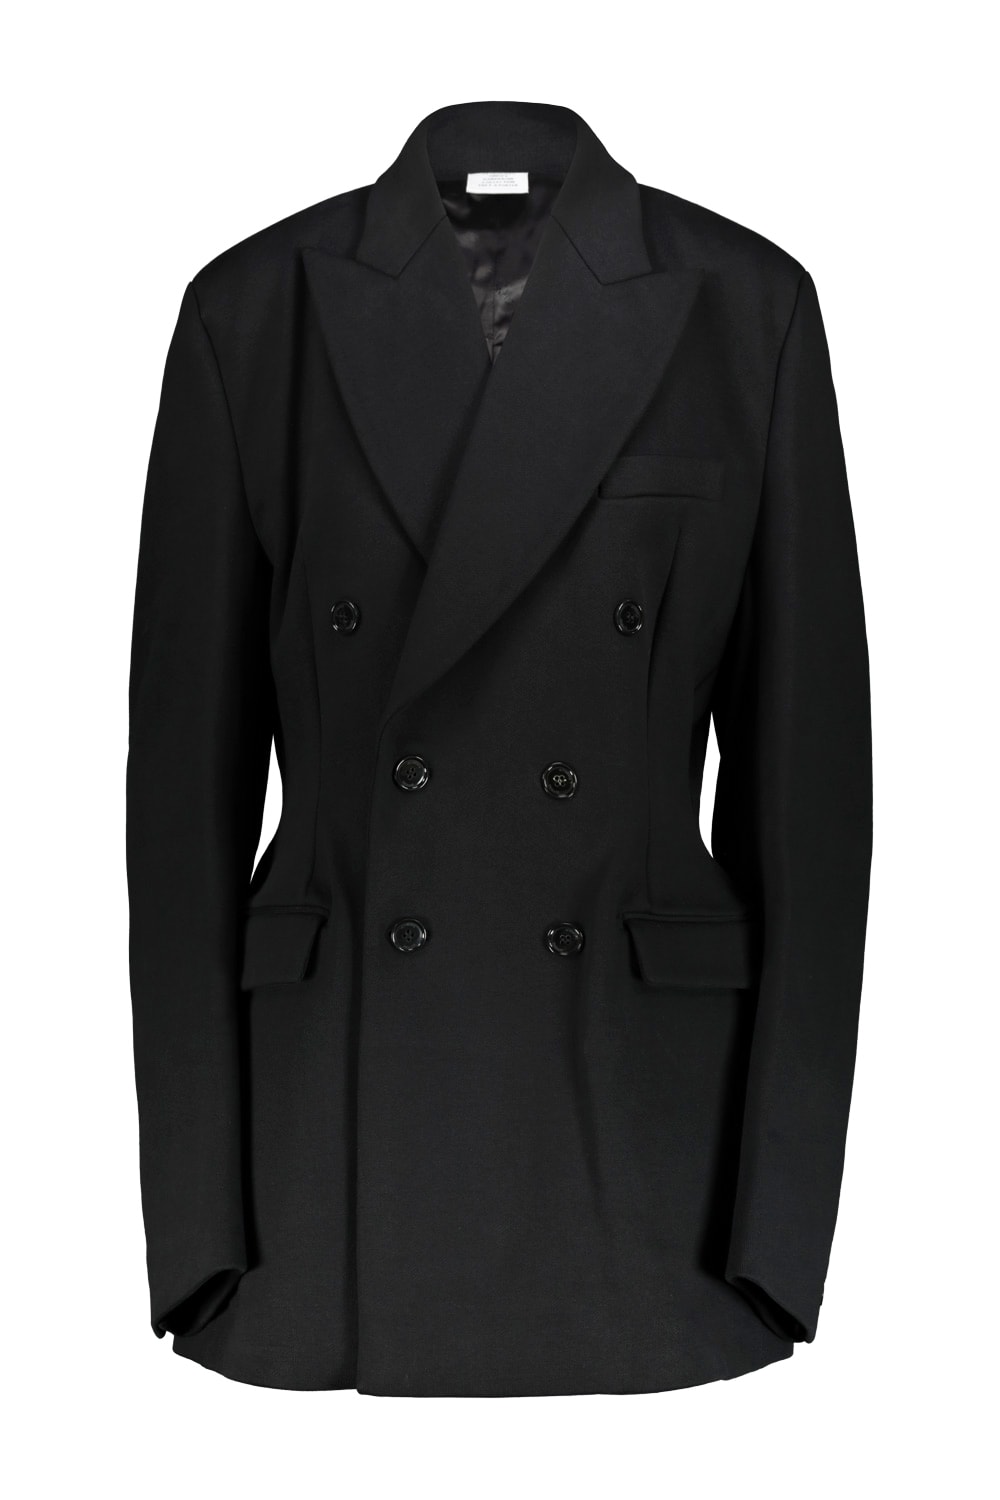 Hourglass Molton Tailored Jacket